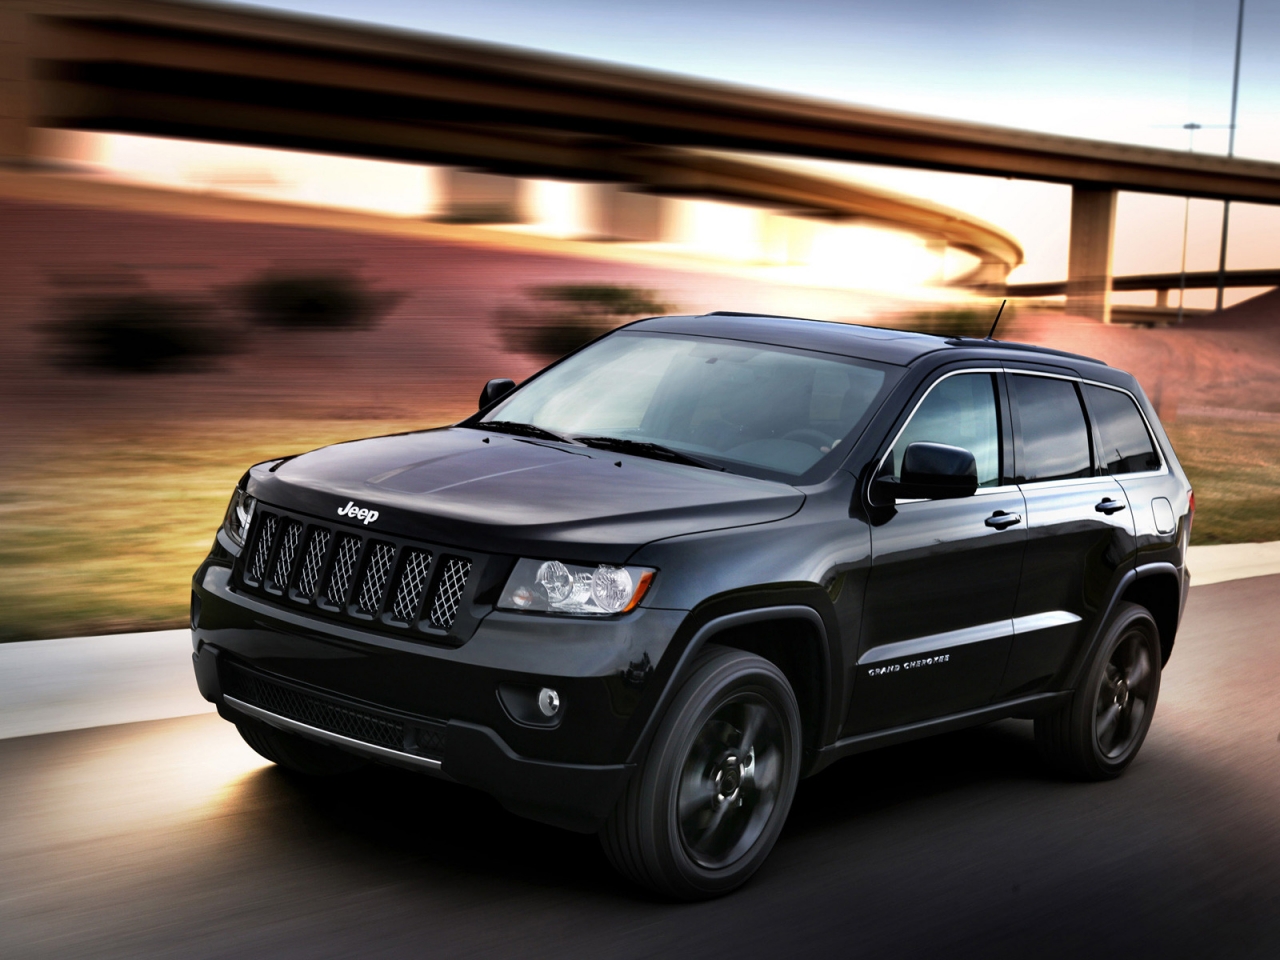 Jeep Grand Cherokee Speed Concept for 1280 x 960 resolution